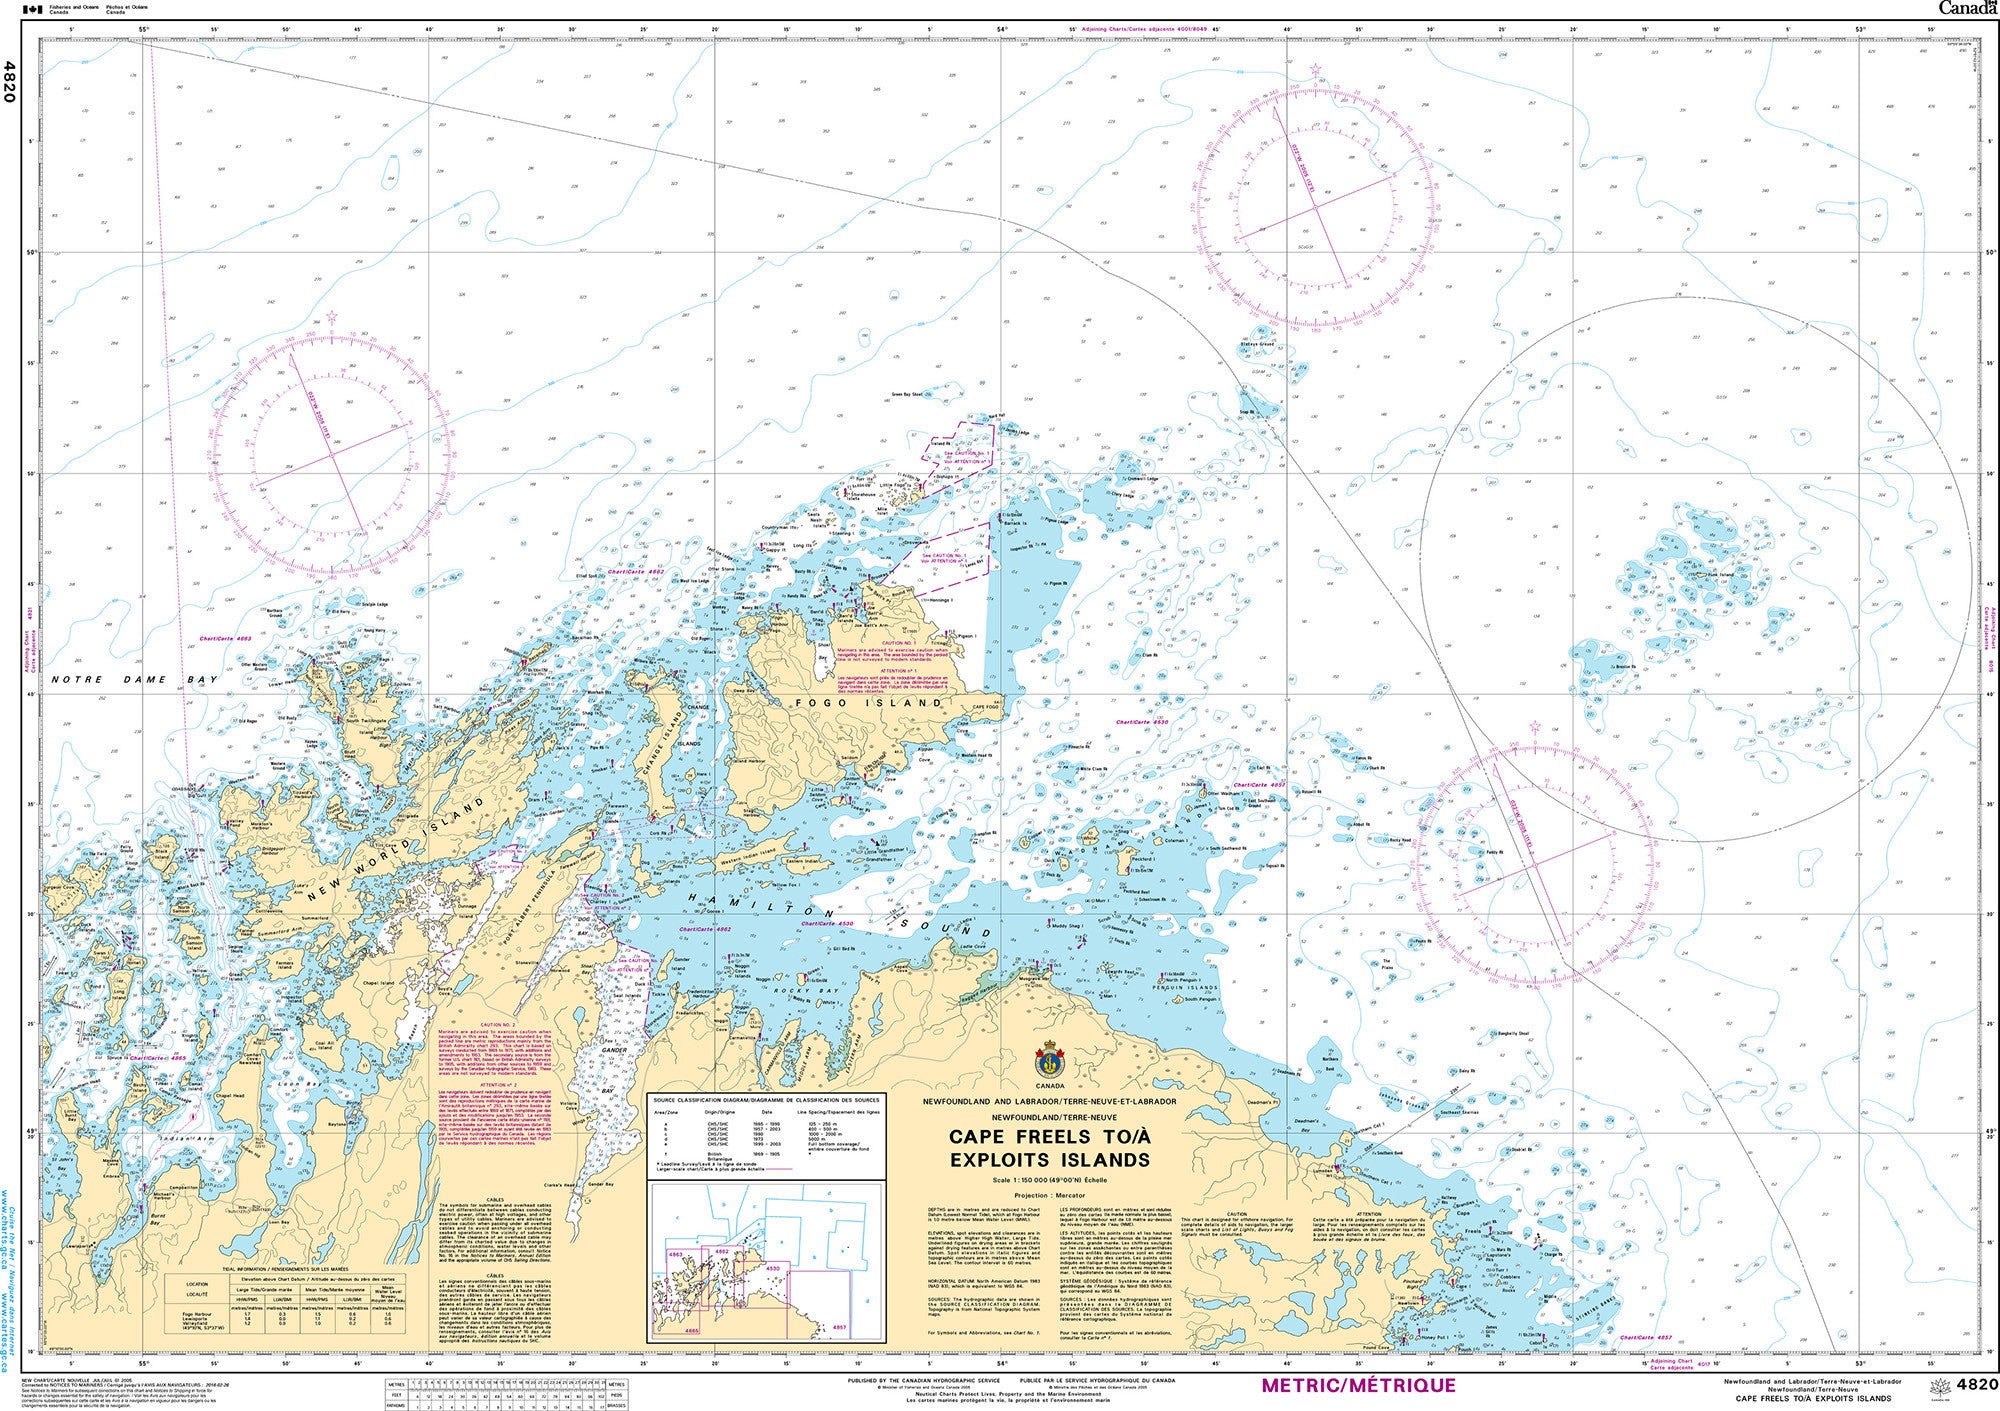 Canadian Hydrographic Service Nautical Chart CHS4820: Cape Freels to/à Exploits Islands